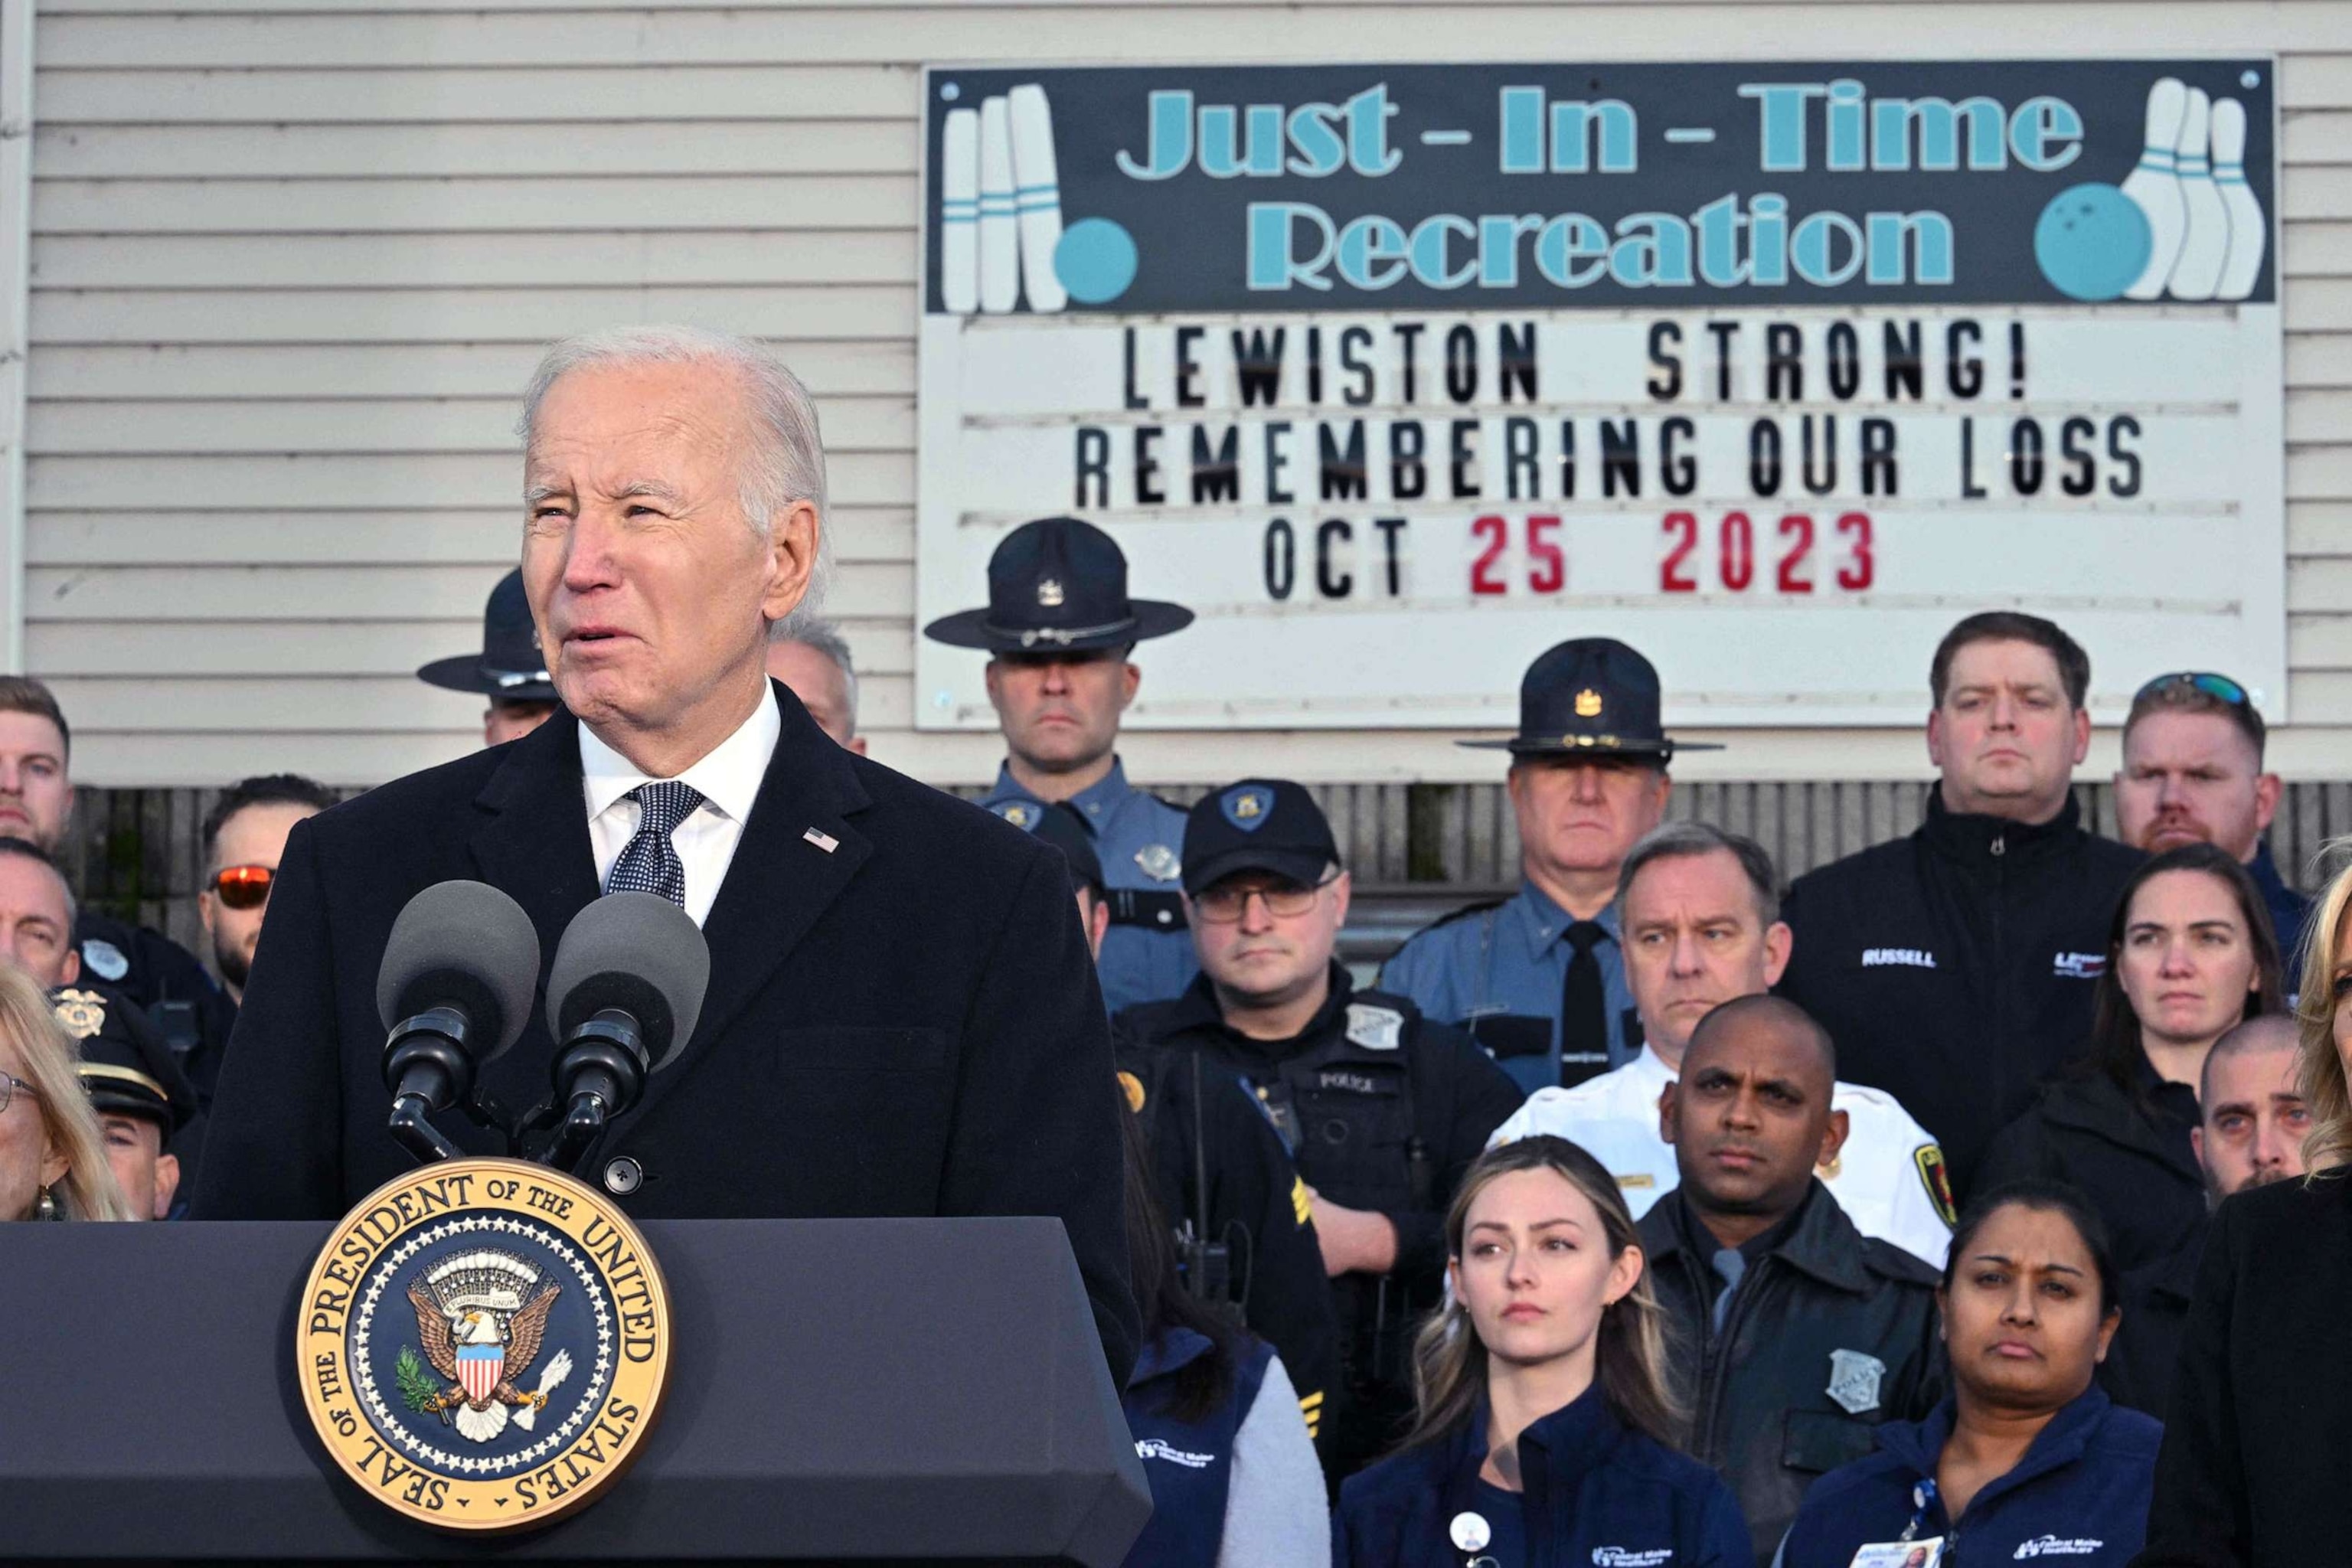 PHOTO: President Joe Biden speaks surrounded by first responders, nurses, and others on the front lines of the response to the Oct. 25, 2023, mass shooting in Lewinston, Maine, on Nov. 3, 2023.